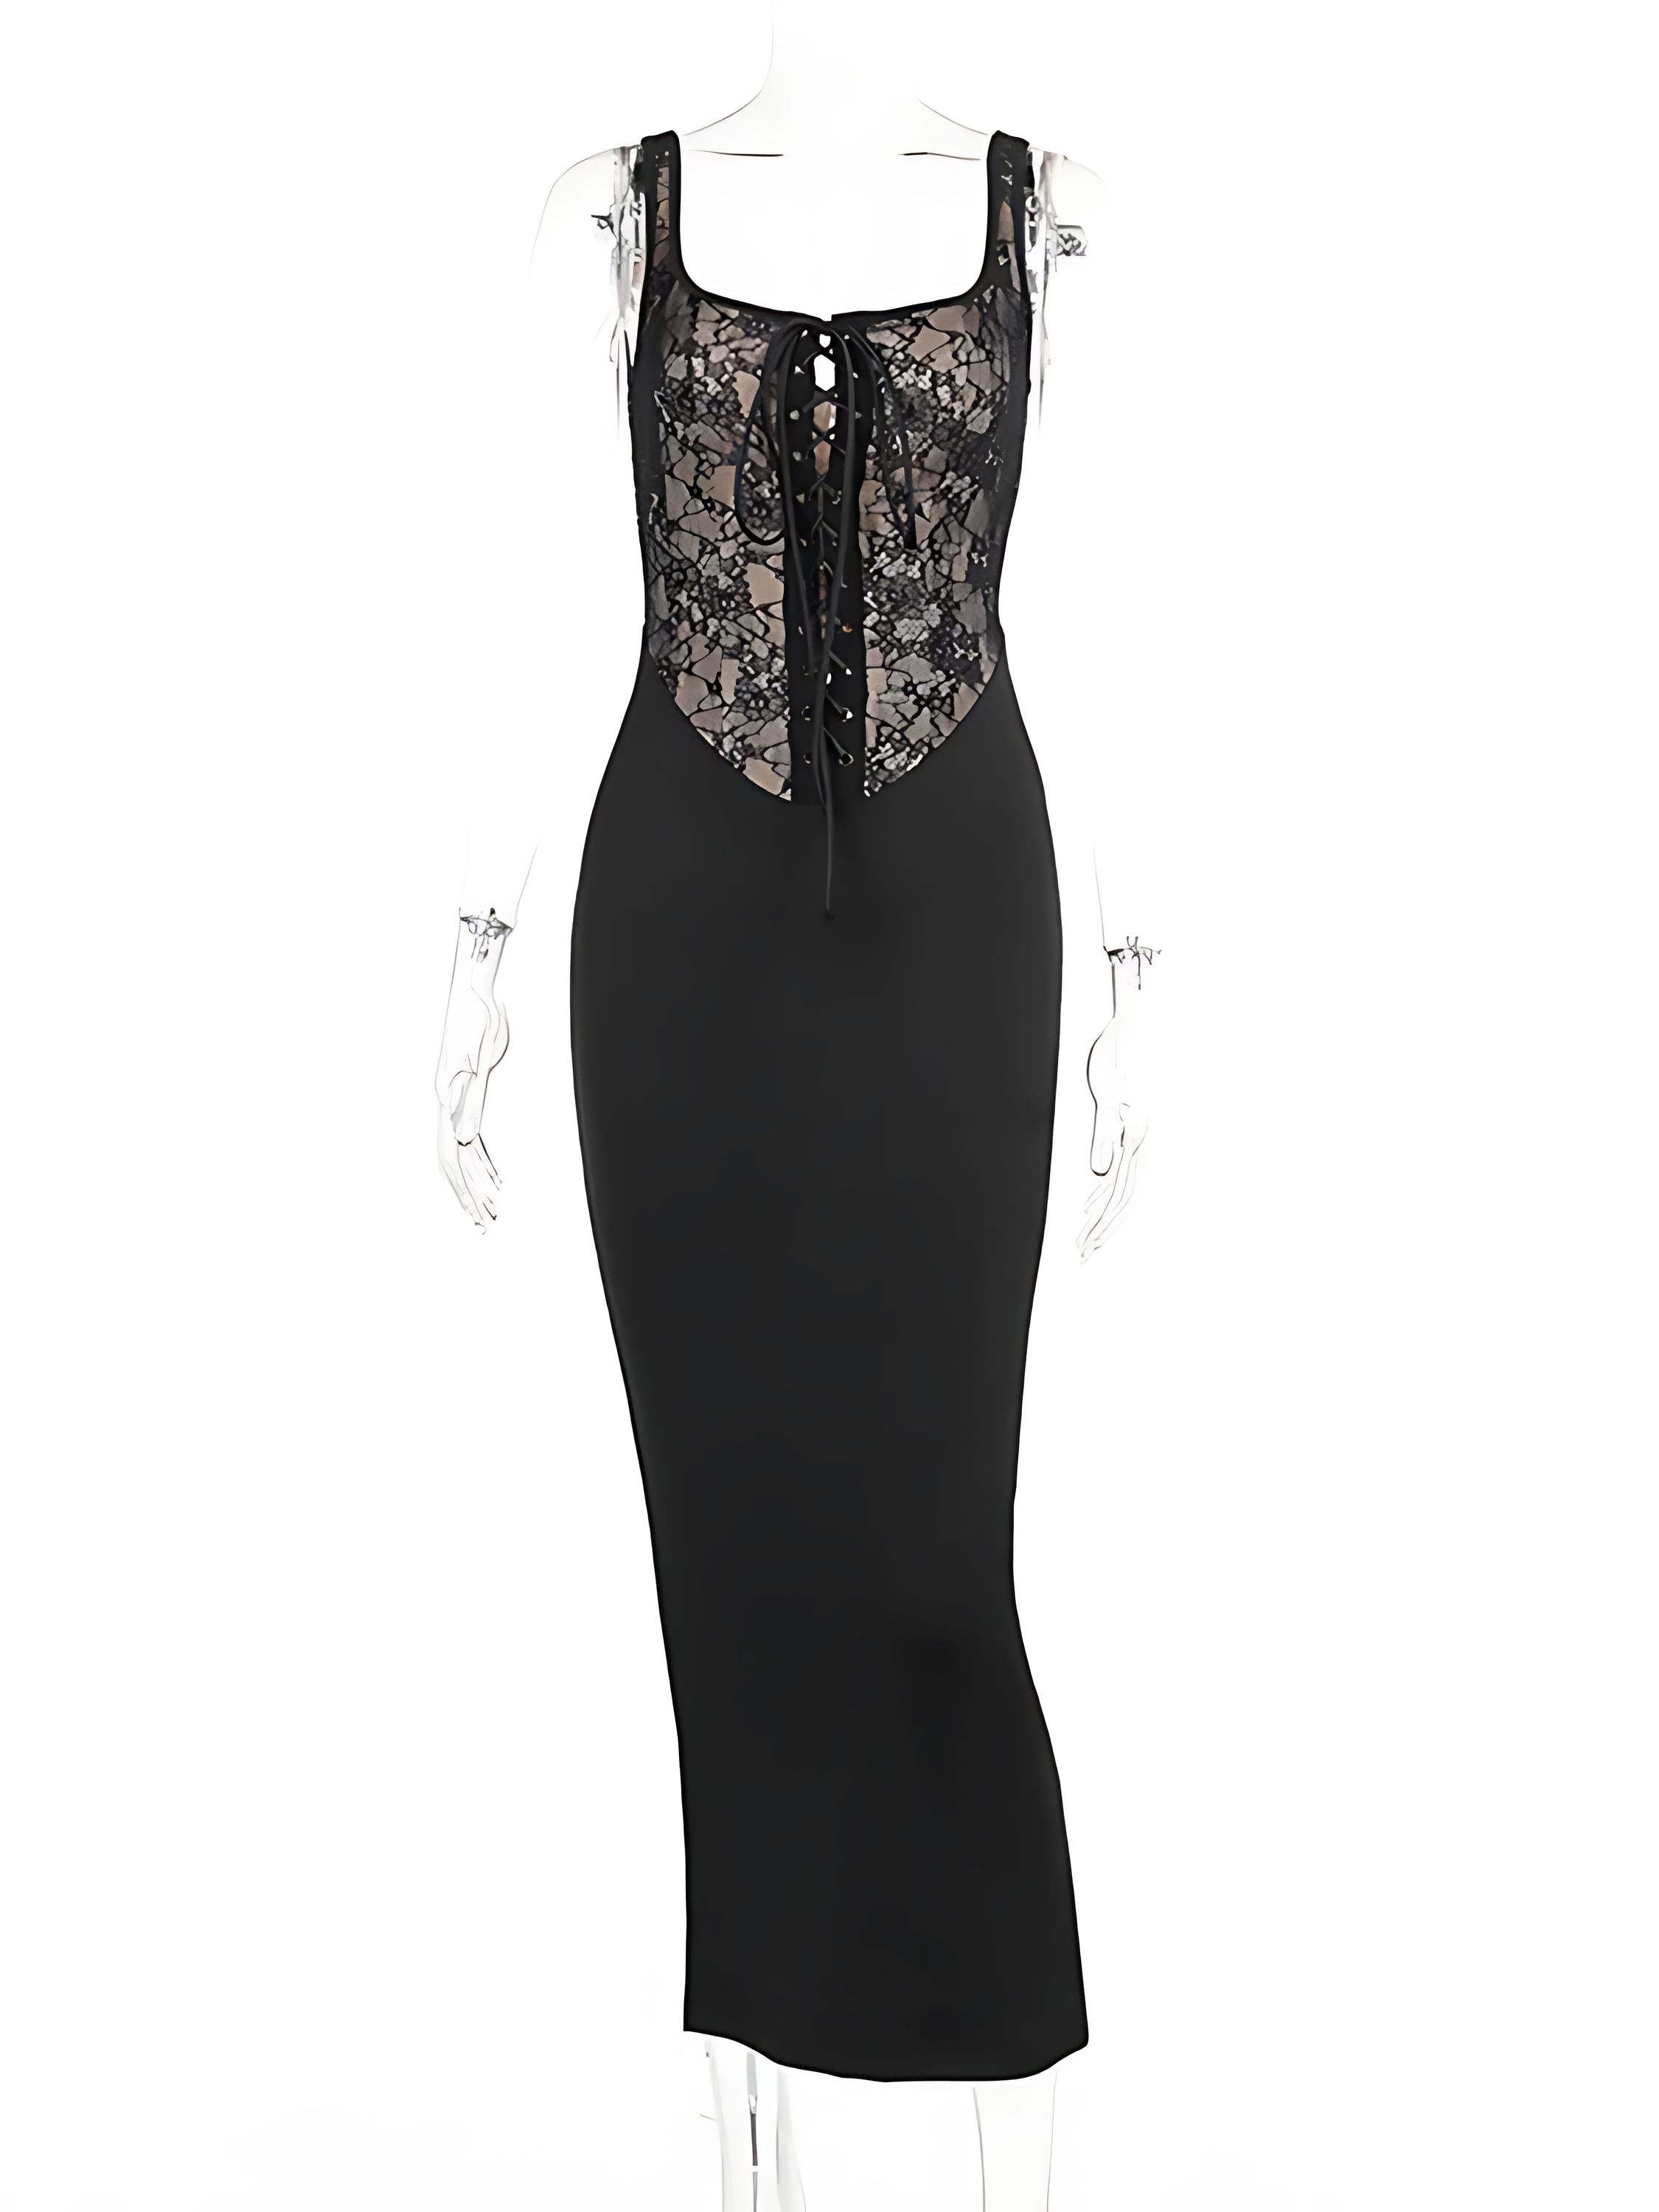 GOTHIC LACE STRAPPY DRESS